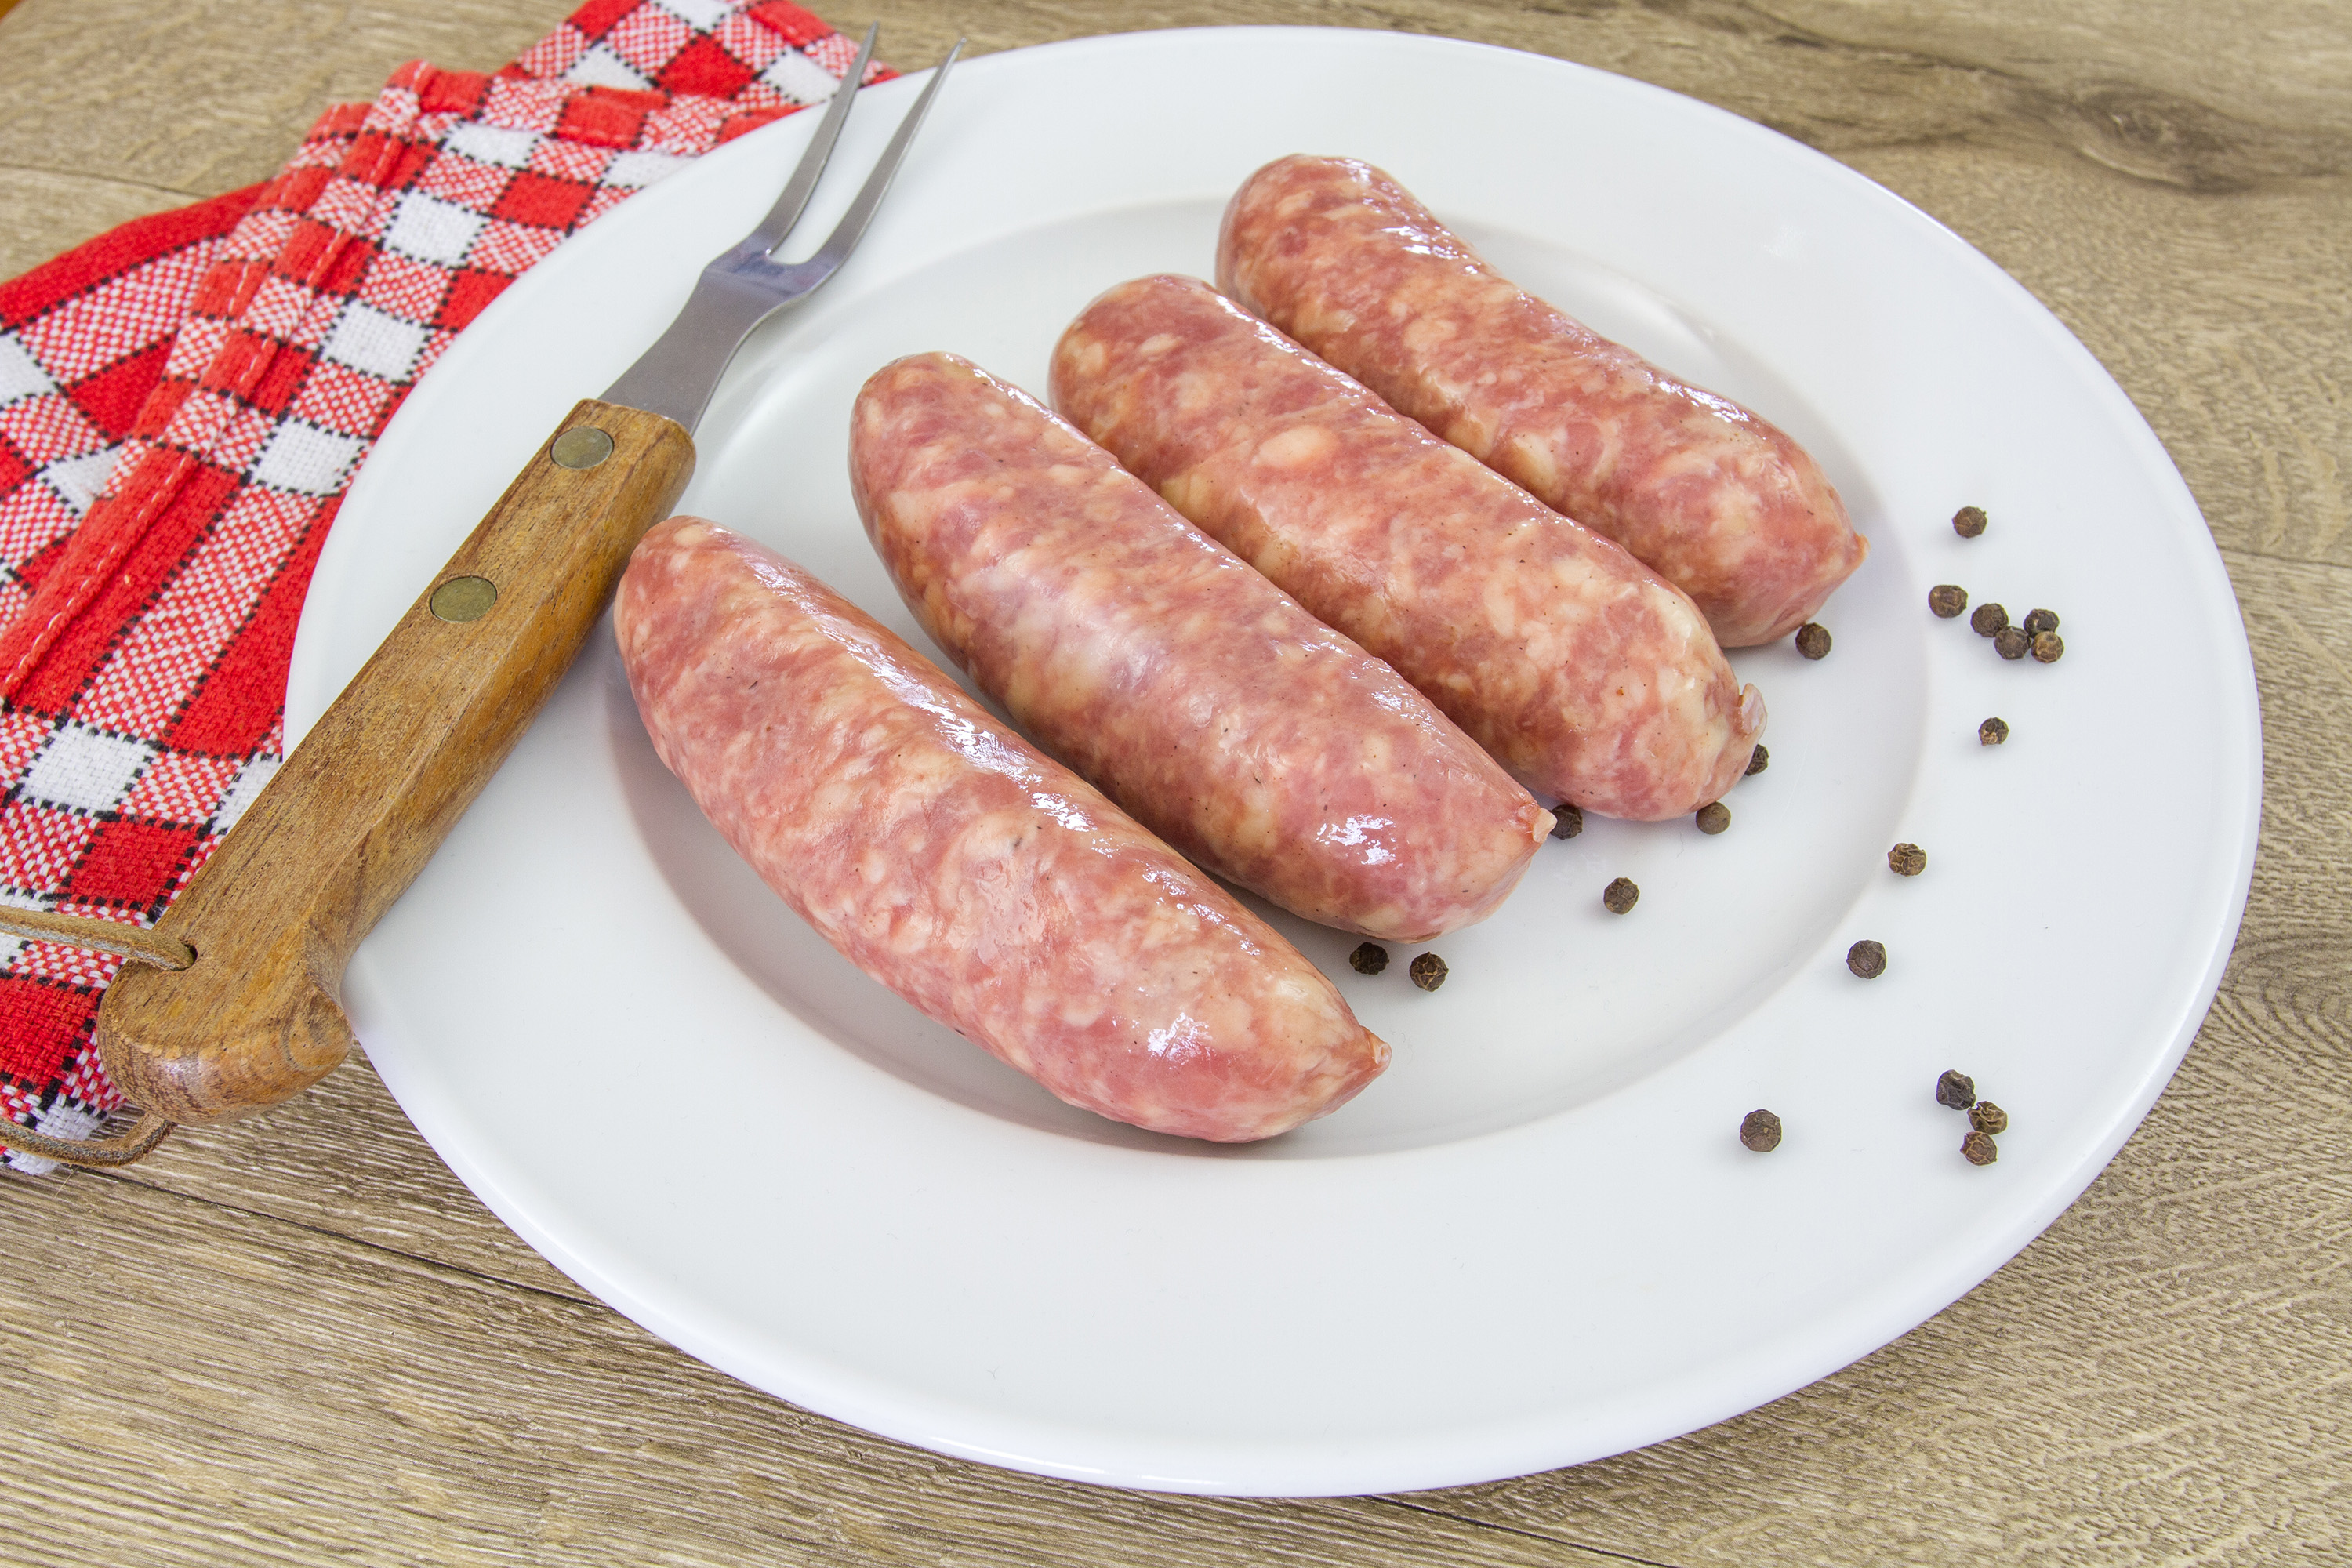 Savoie, Diot Sausage | France From Traditional